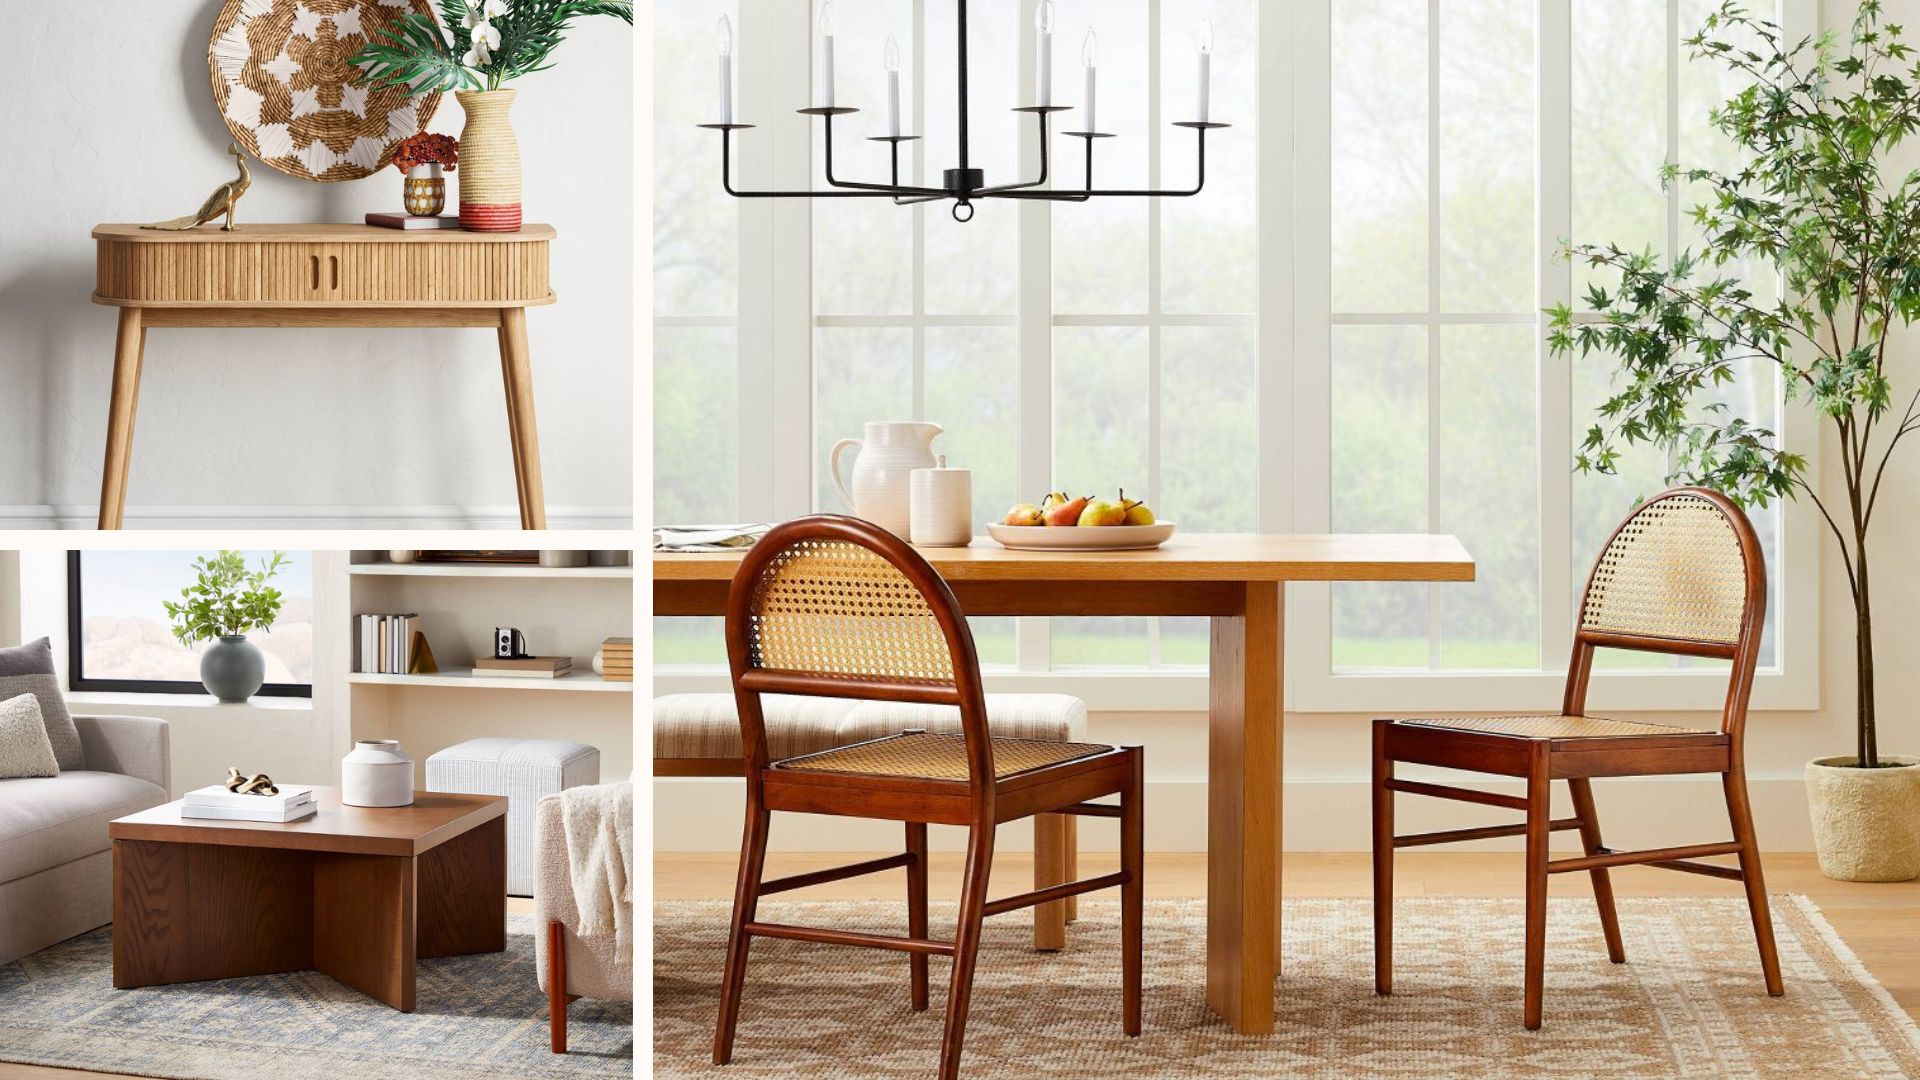 12 target furniture pieces that scream 'quiet luxury' | woman & home